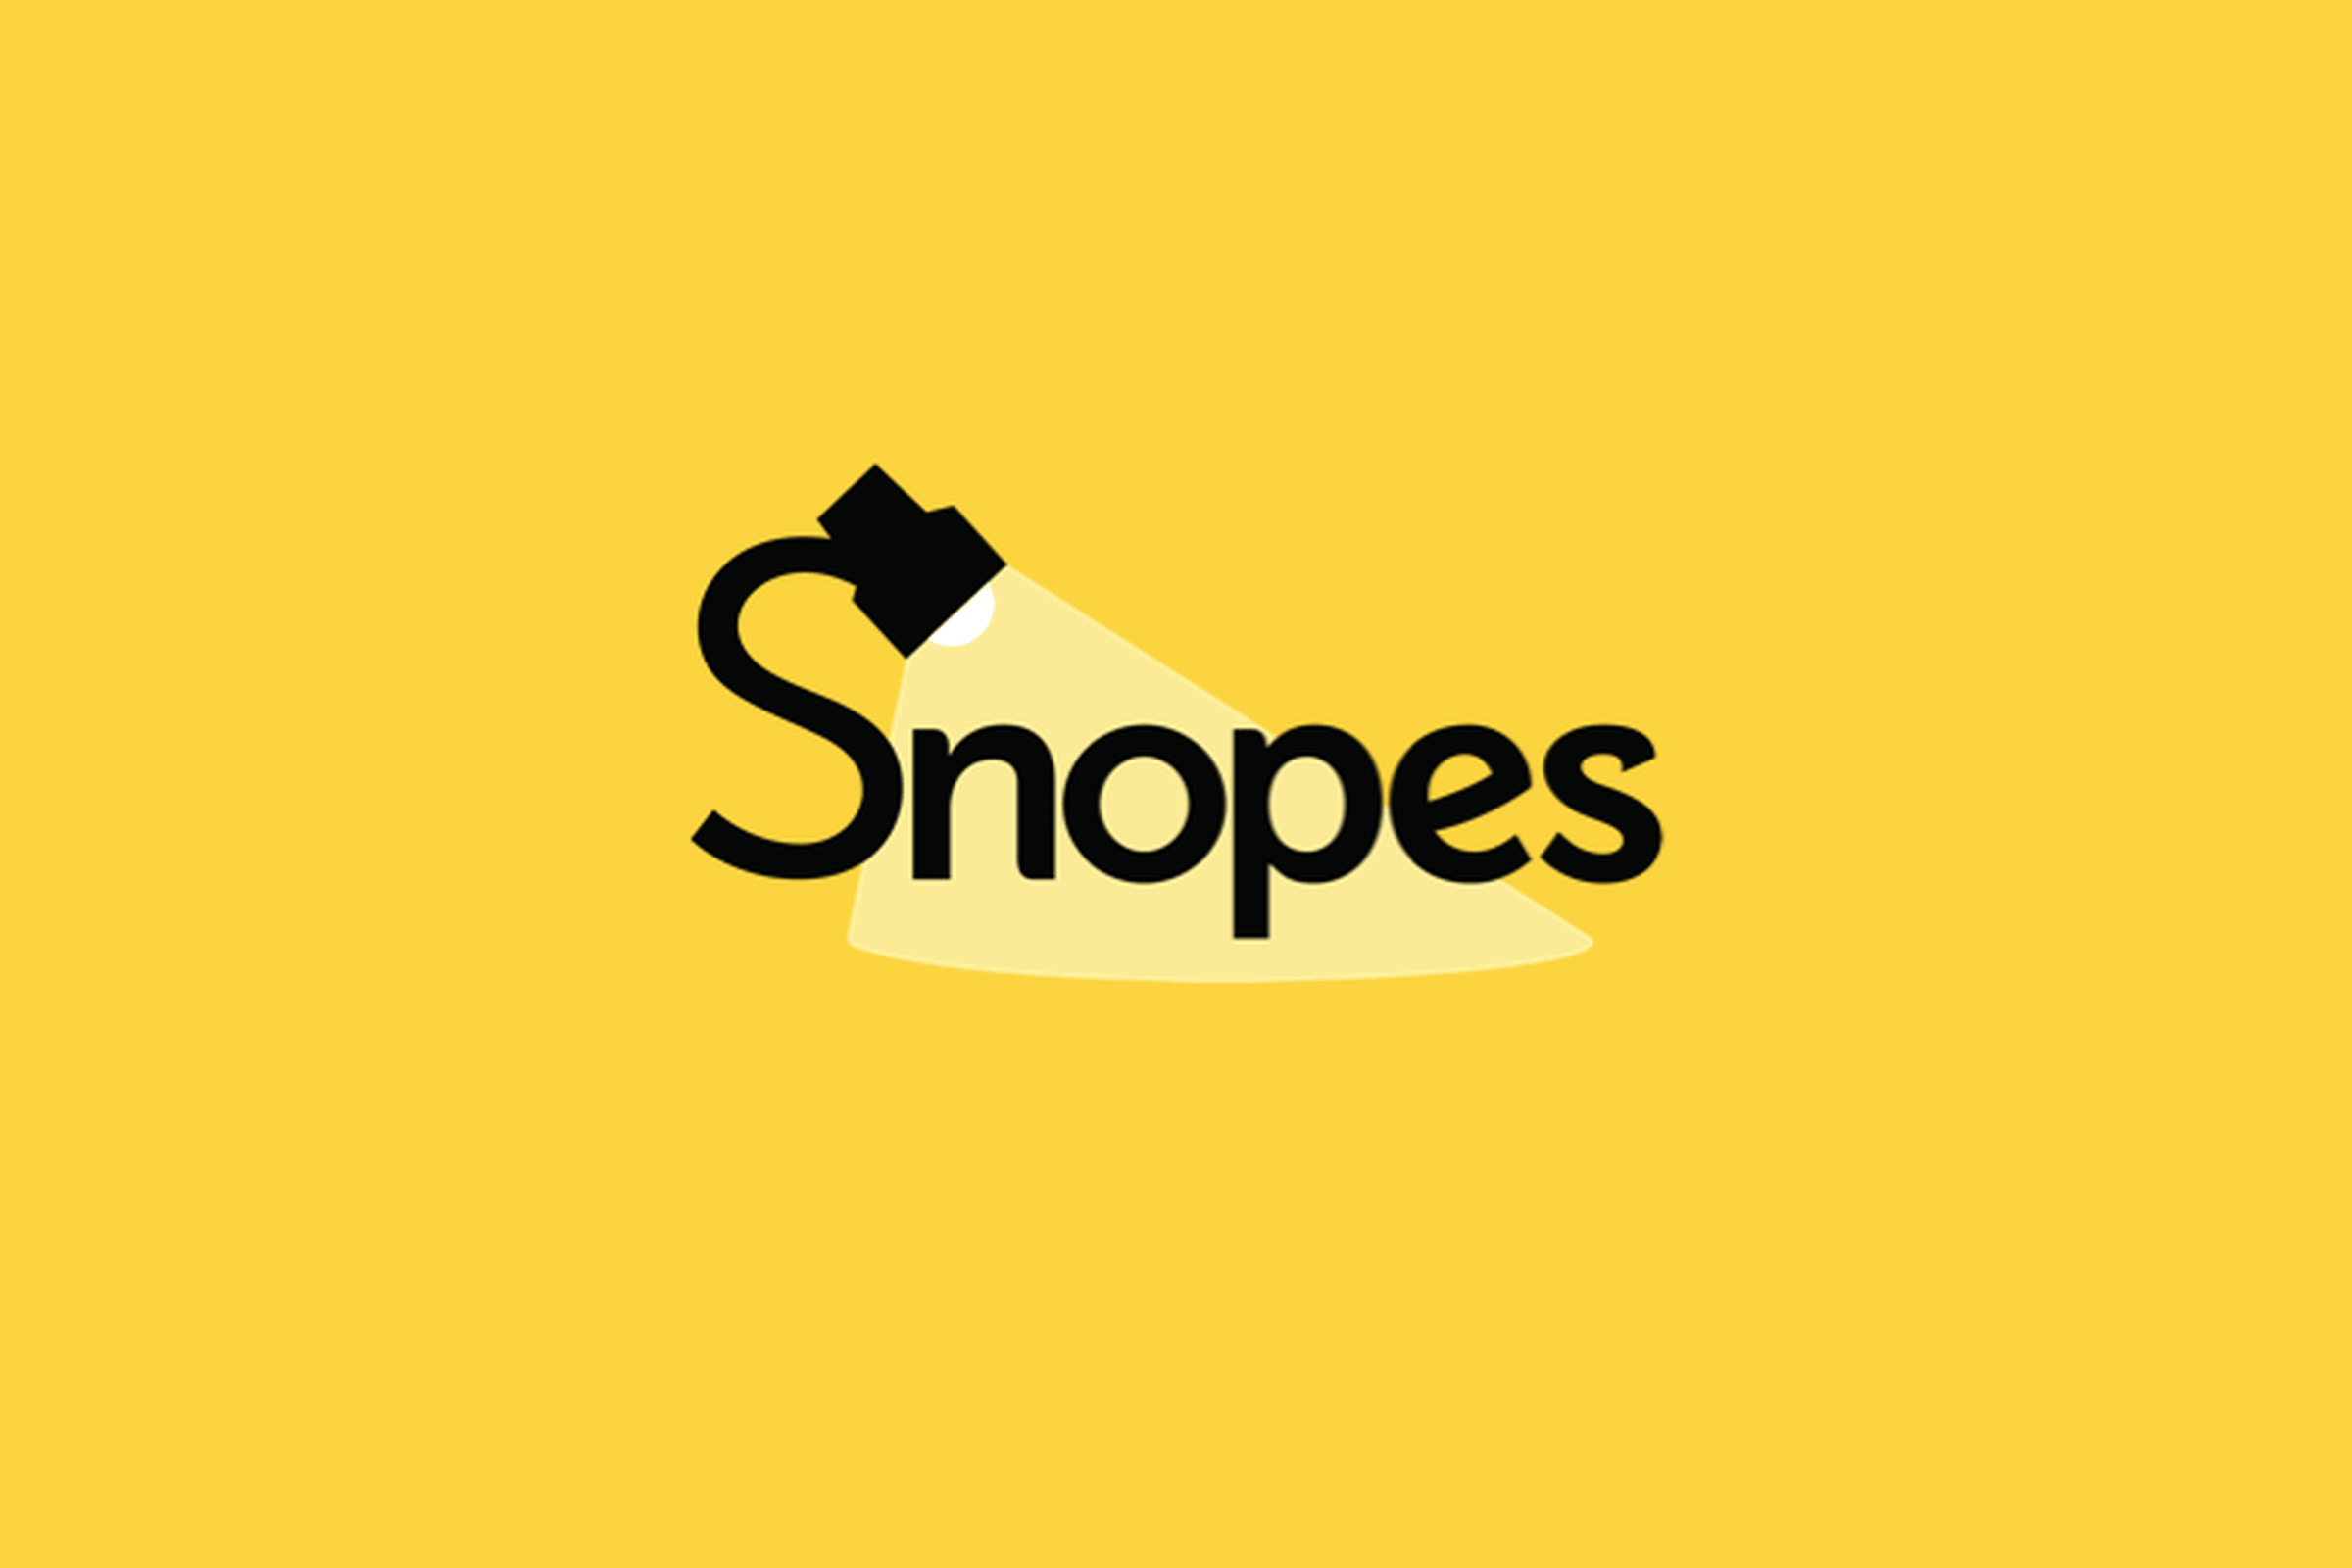 A Snopes editor reportedly plagiarized other news sites